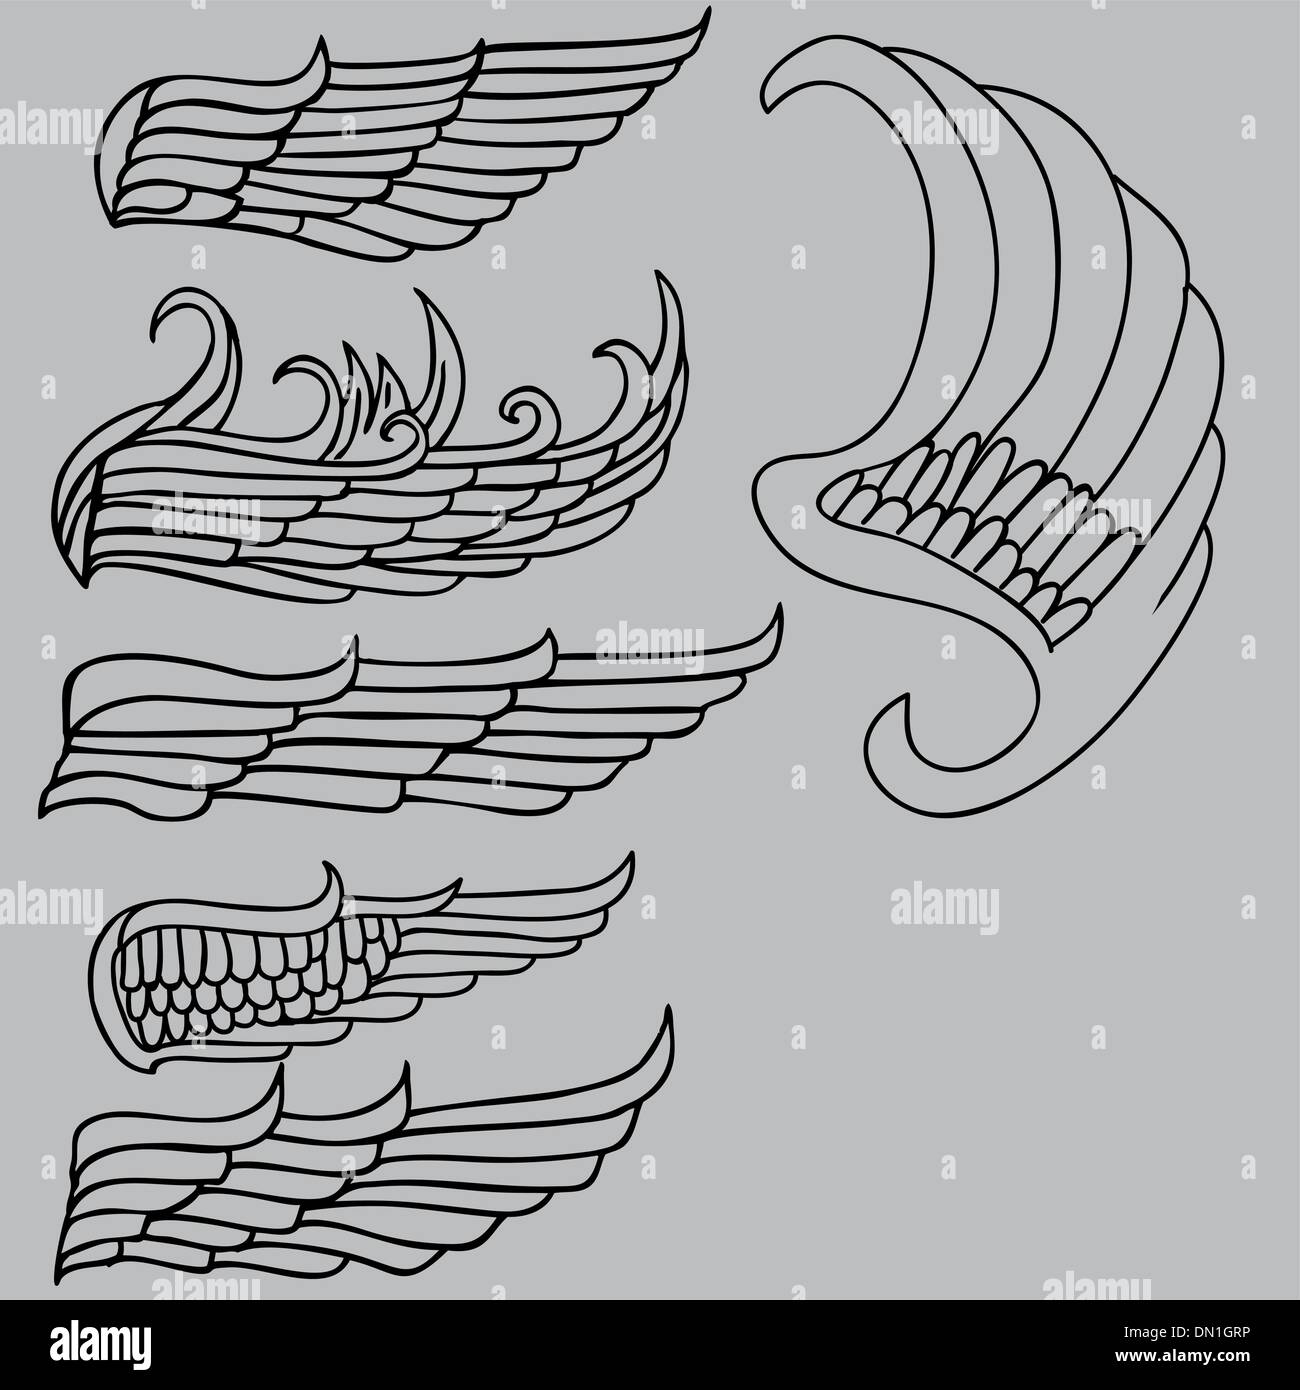 Eagle Fly Wing Tattoo Designs from GraphicRiver